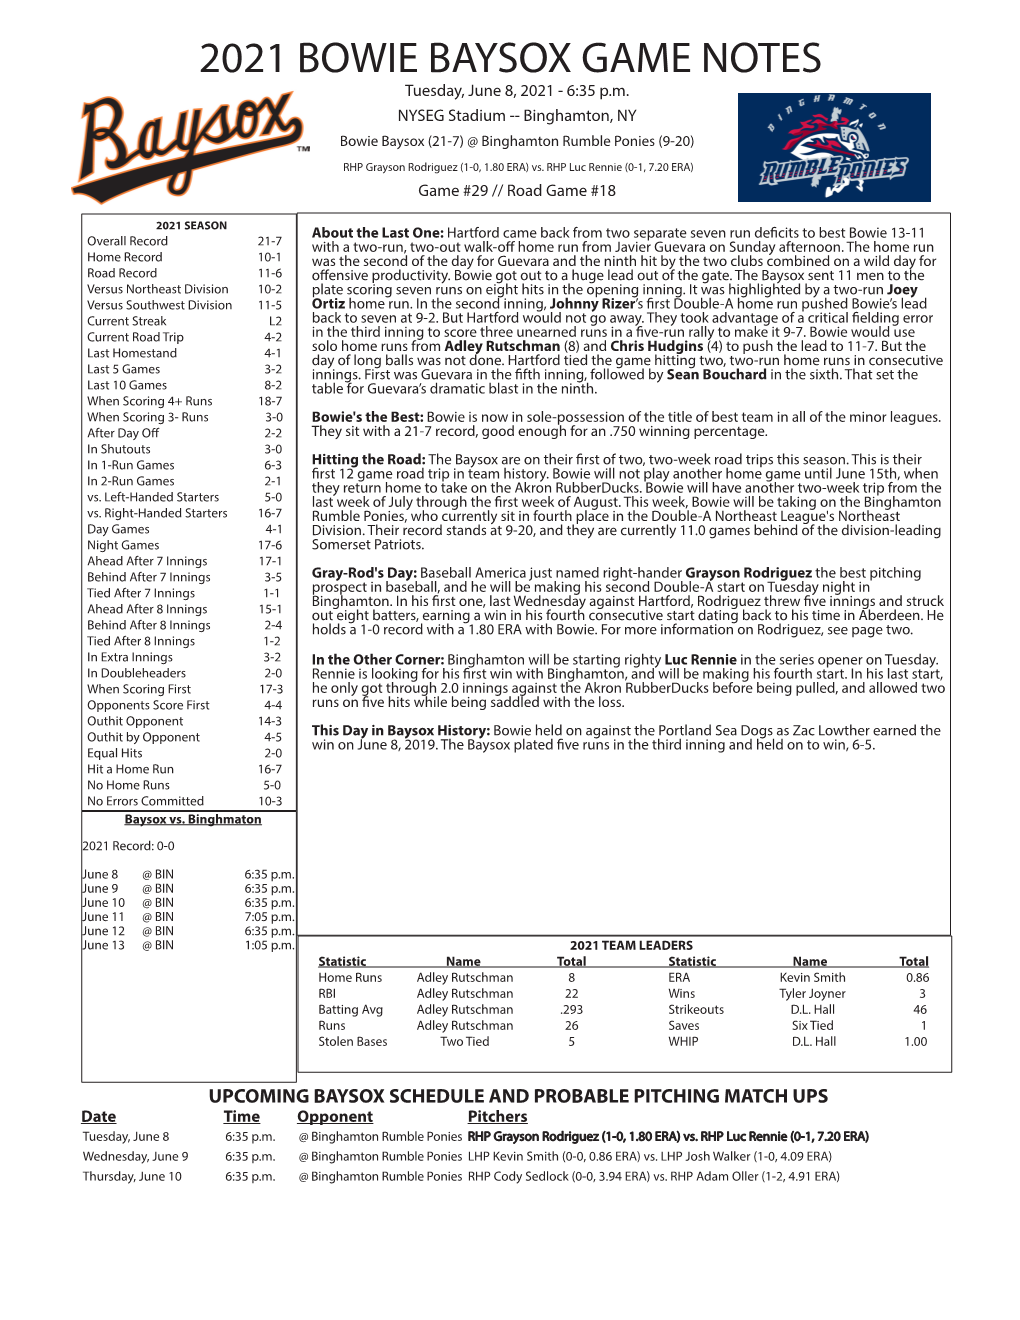 2021 BOWIE BAYSOX GAME NOTES Tuesday, June 8, 2021 - 6:35 P.M